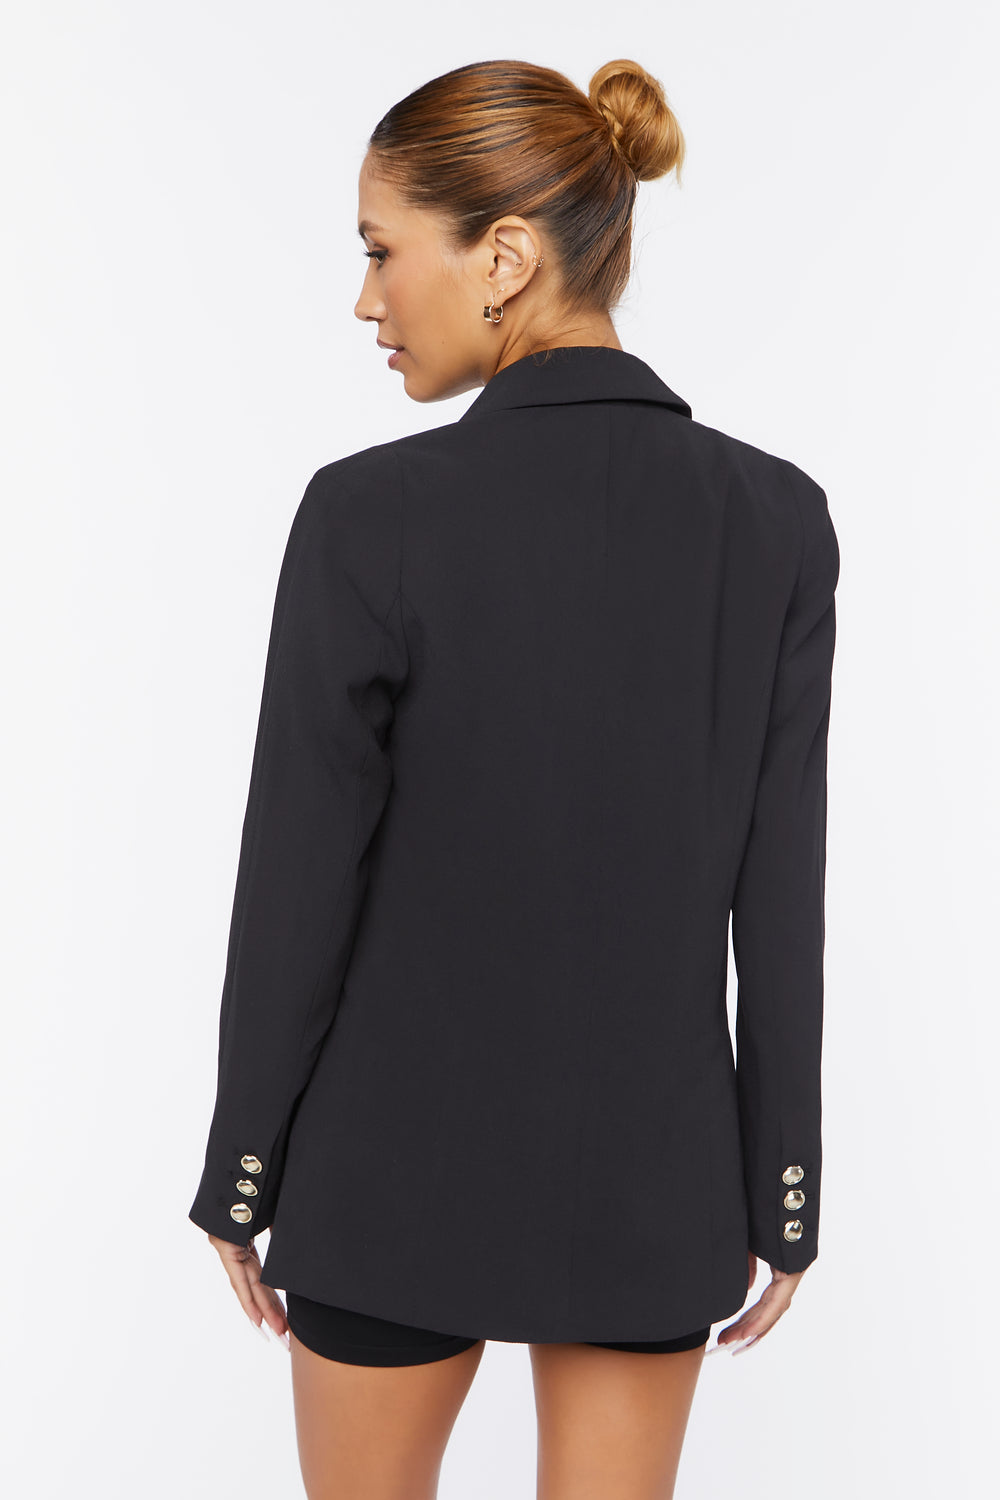 Notched Double-Breasted Blazer Black